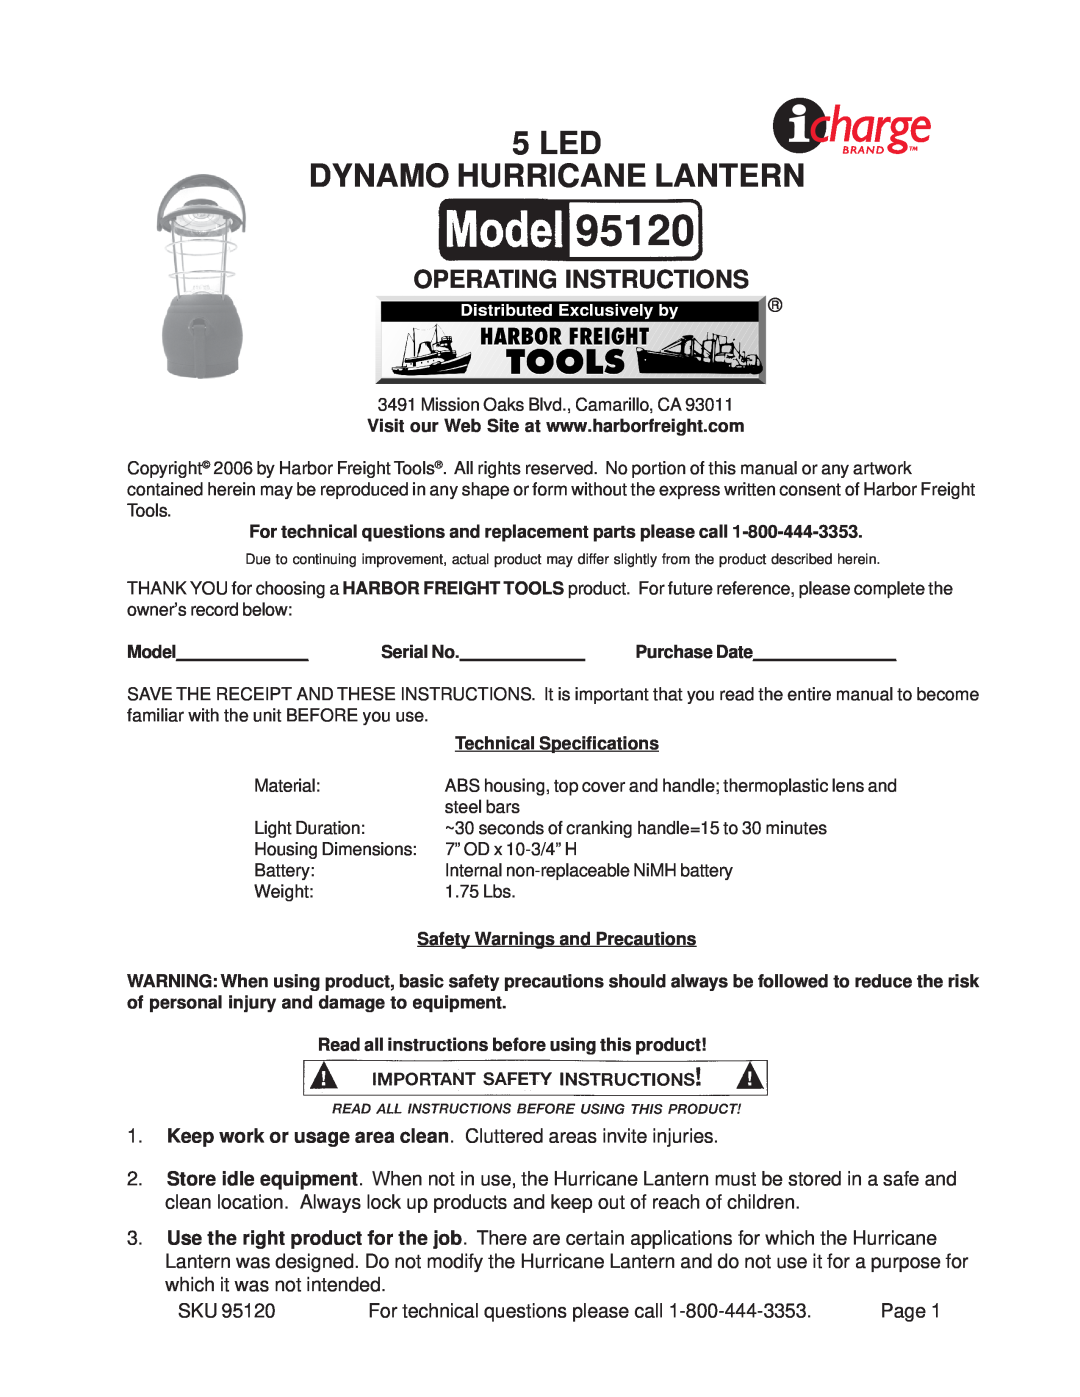 Harbor Freight Tools 95120 technical specifications Led Dynamo Hurricane Lantern, Operating Instructions, Model, Serial No 